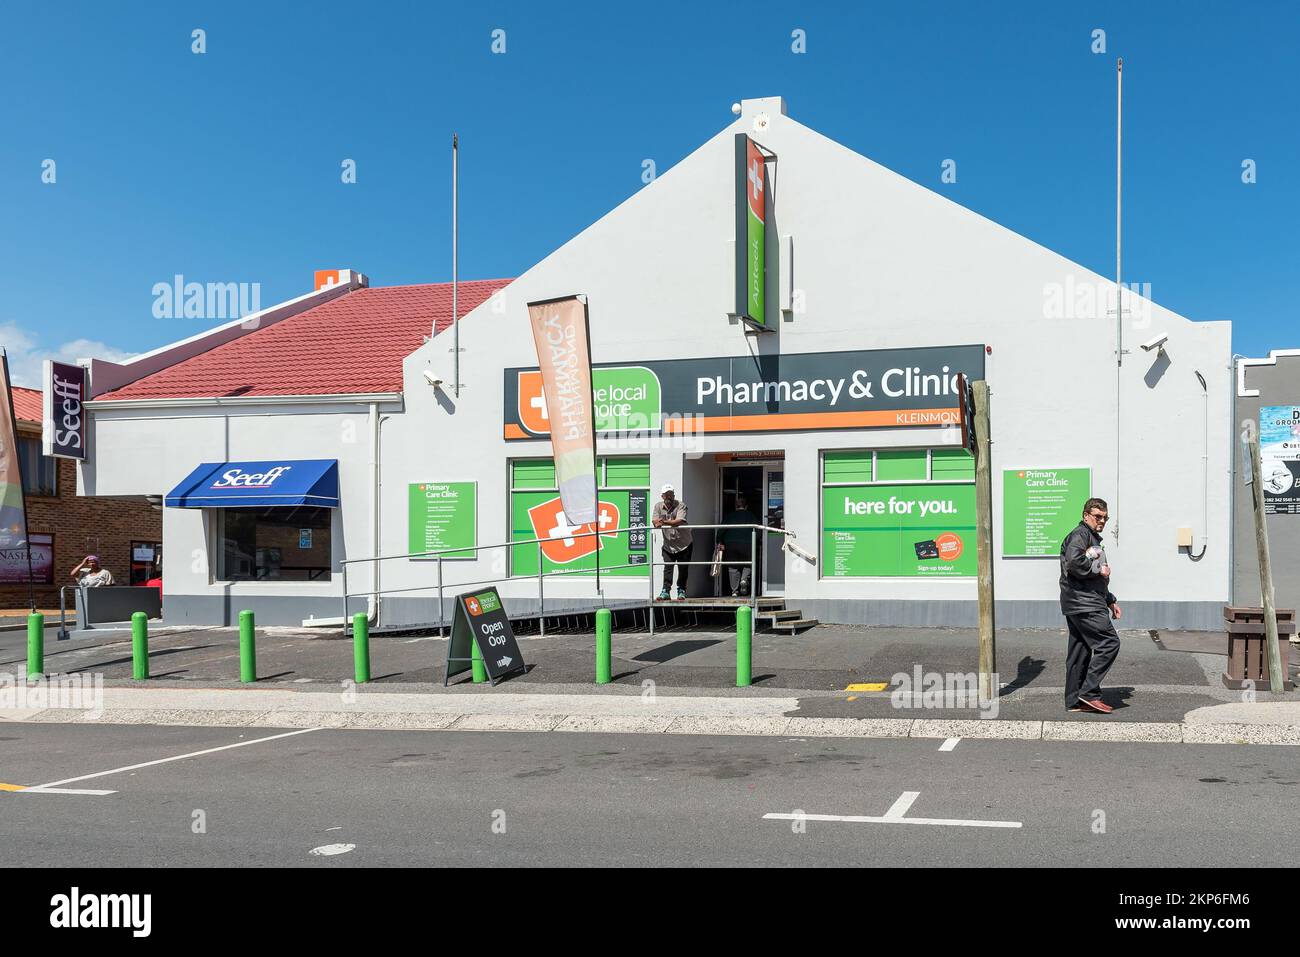 Kleinmond, South Africa - Sep 20, 2022: A street scene, with a pharmacy, clinic and people, in Kleinmond in the Western Cape Province Stock Photo